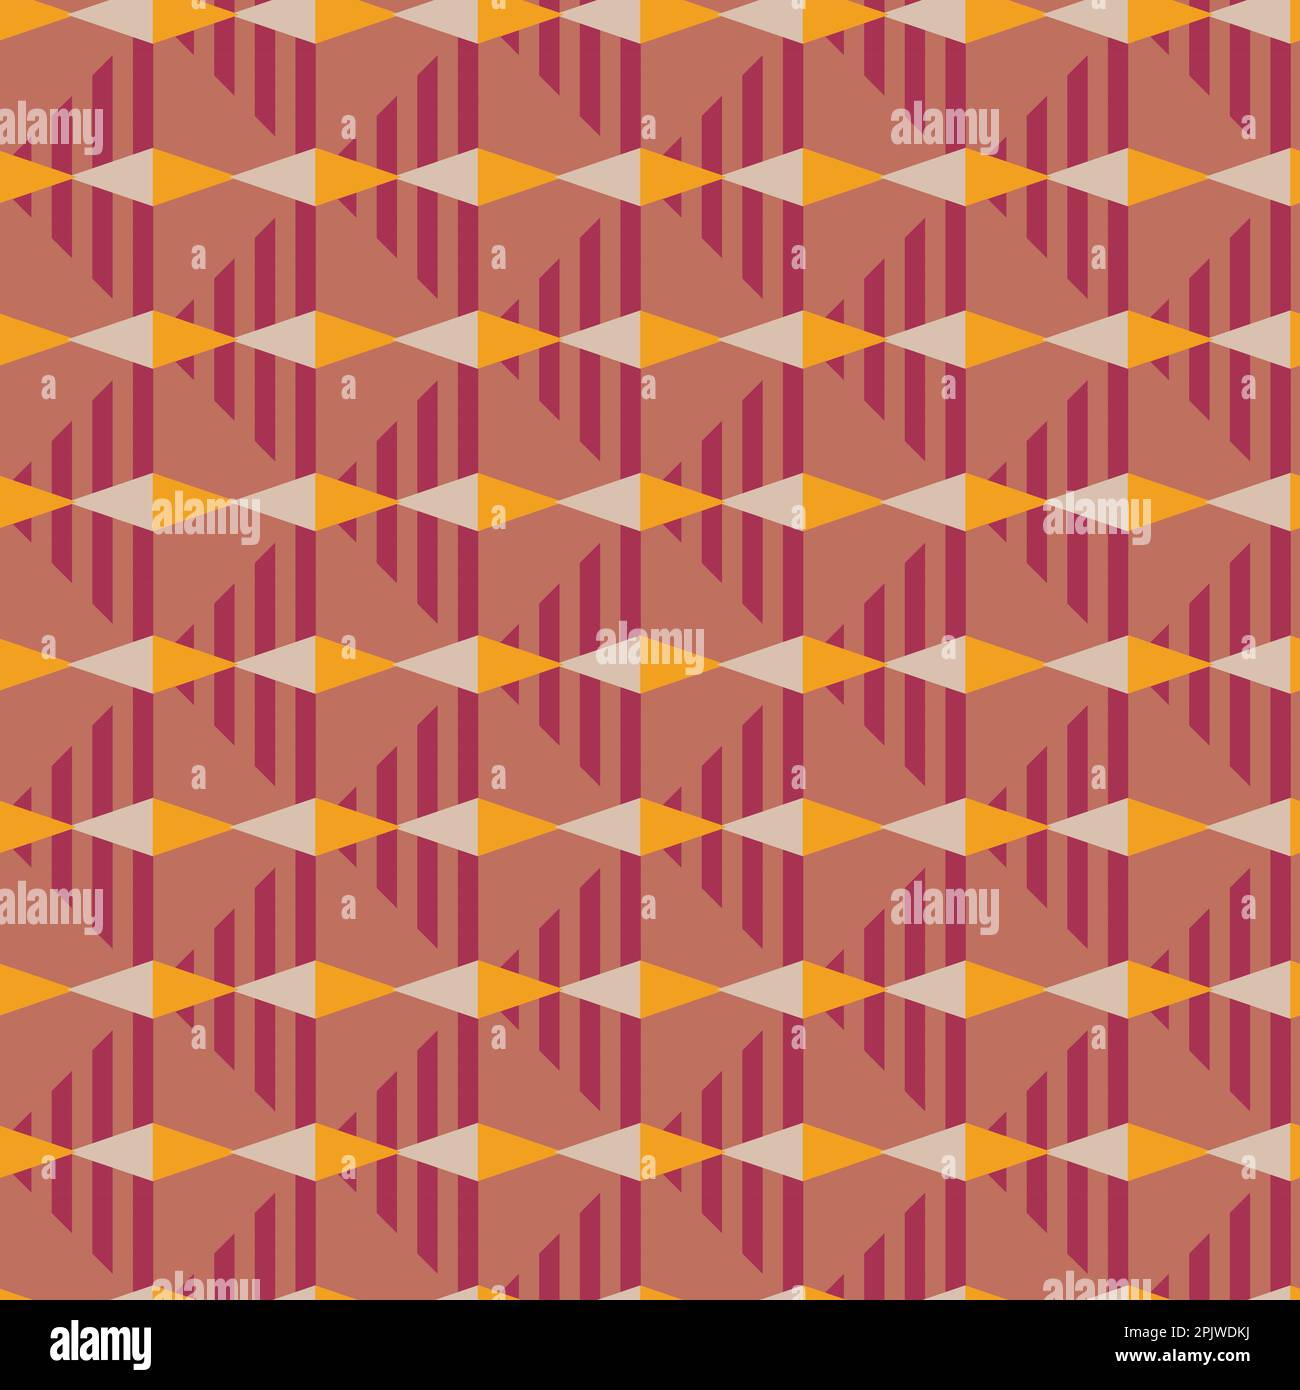 70s retro geometric vector seamless pattern. Mid century style abstract design. Perfect for textile, wallpaper, fabrics, clothing and fashion print. Stock Vector